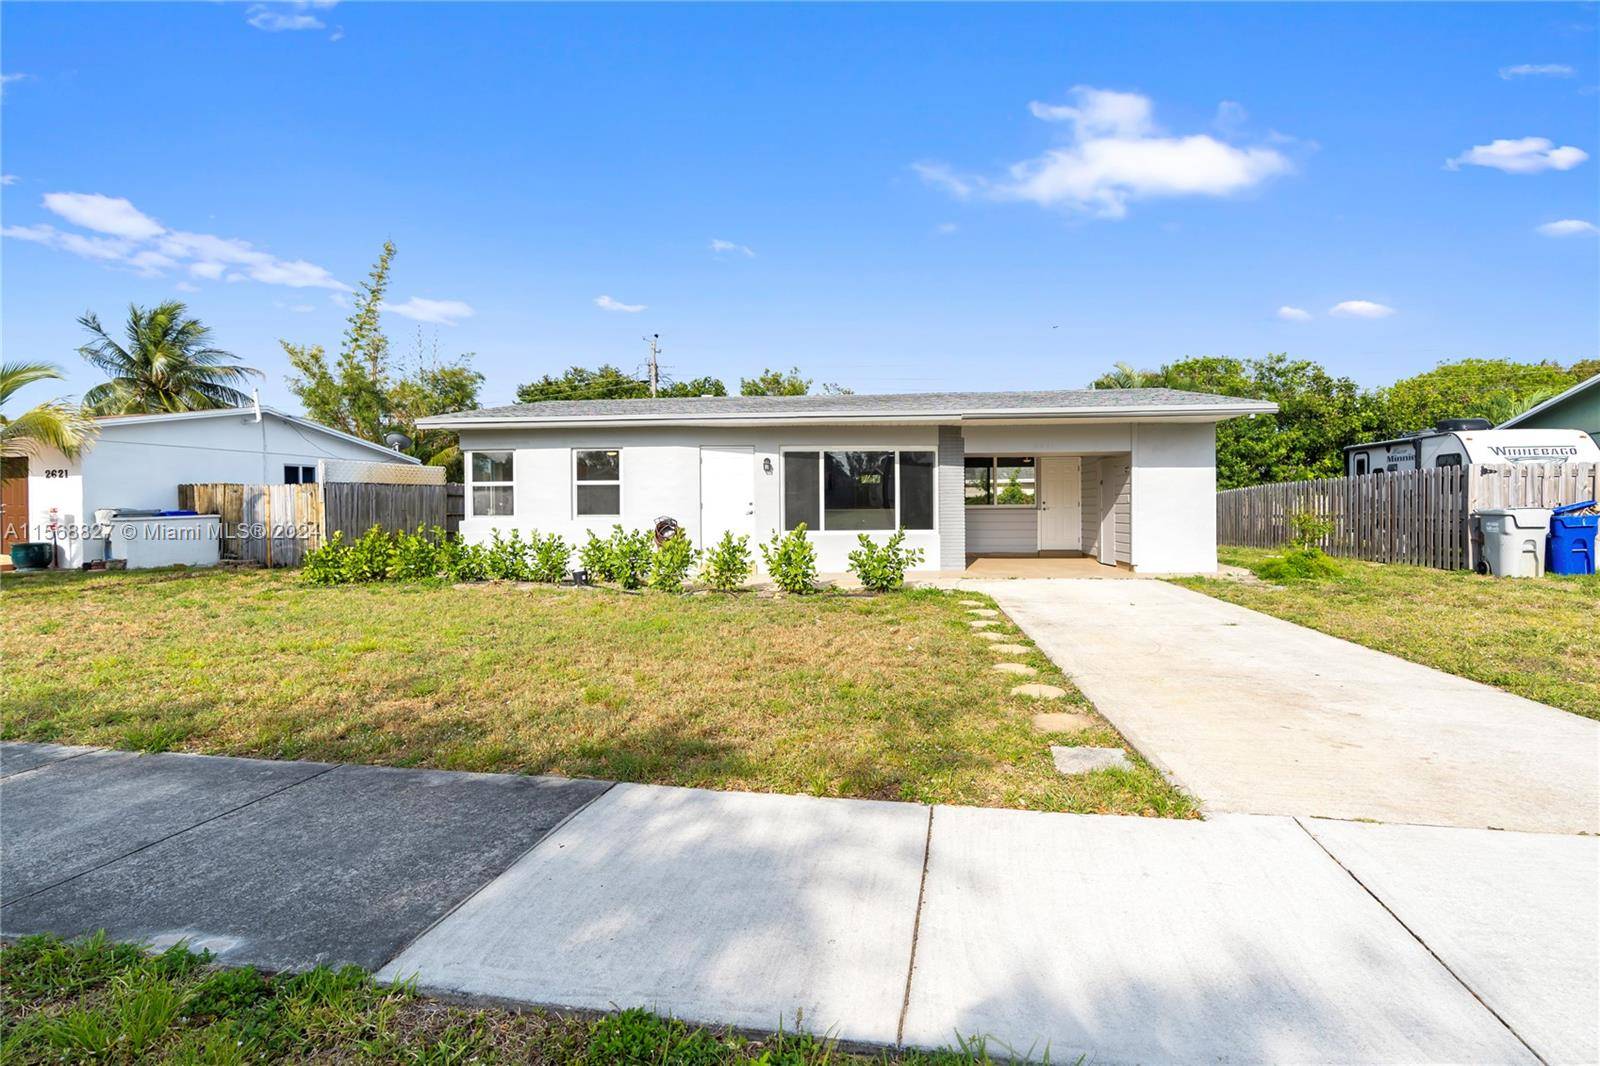 Congratulations ! You've found your perfect slice of paradise in Pompano Beach, FL !